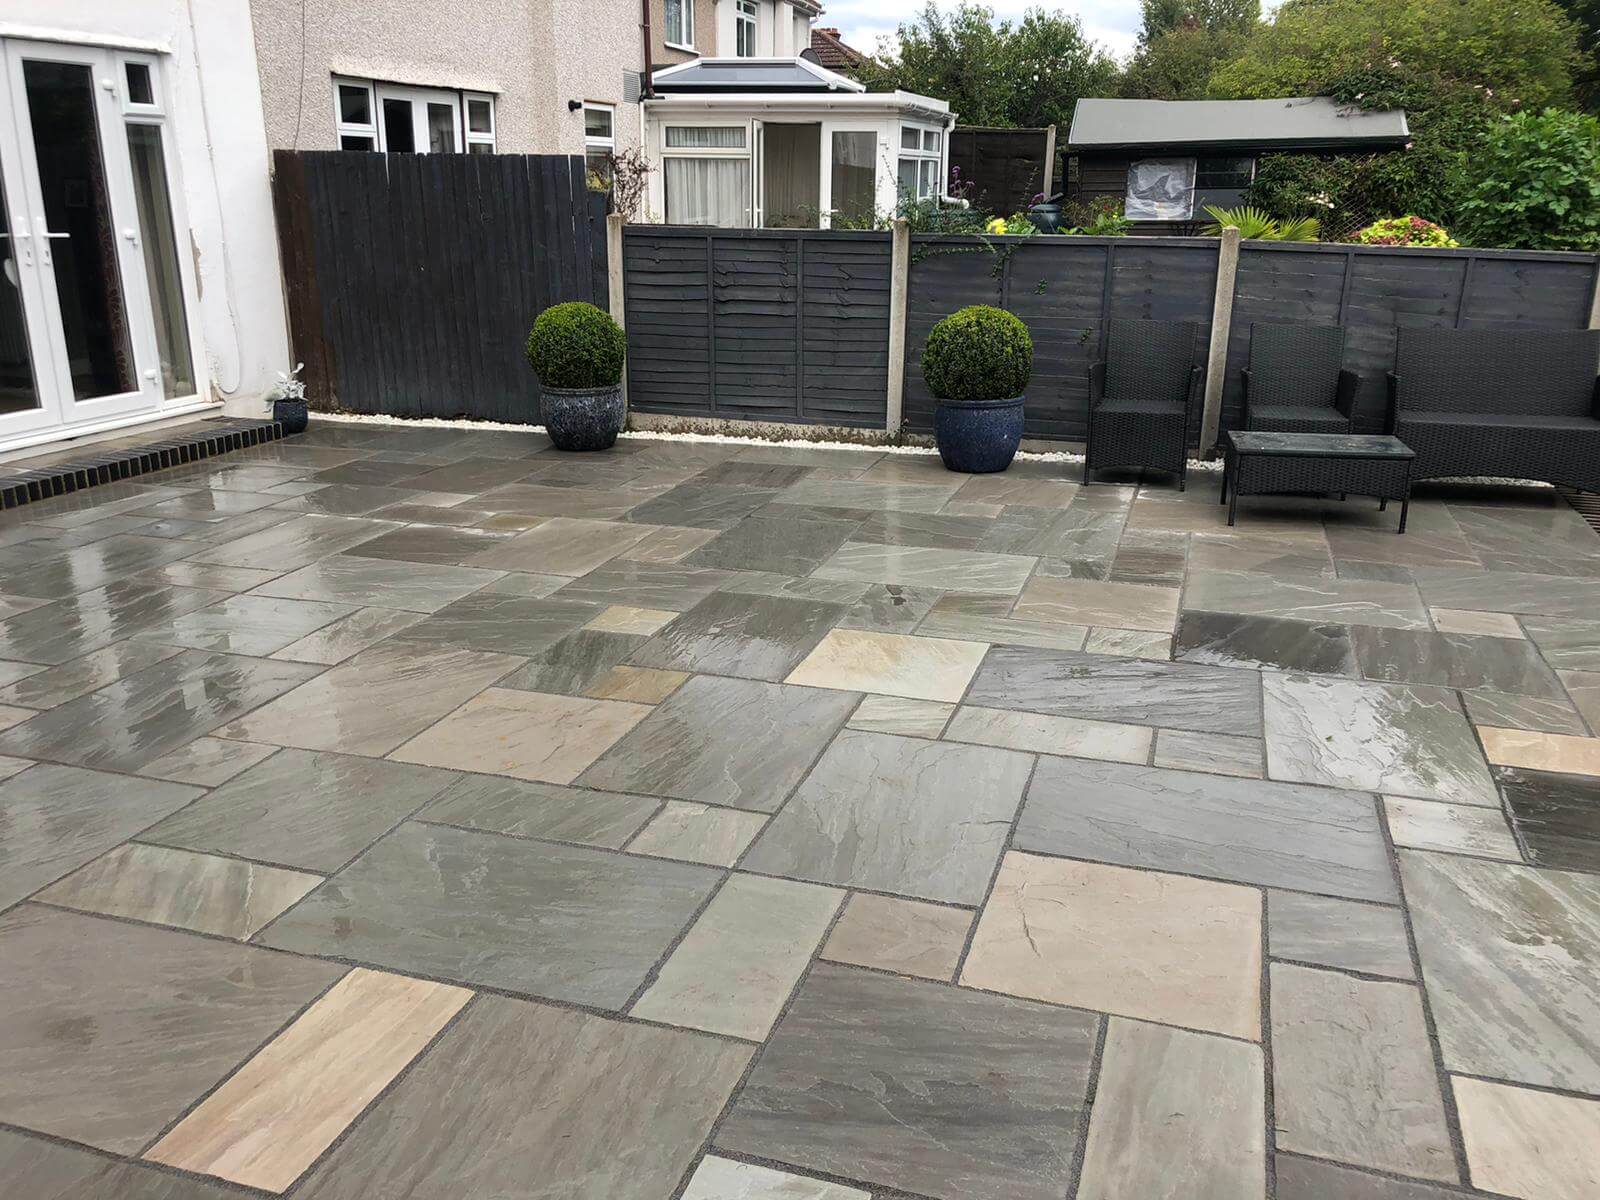 Indian Sandstone Paving Contractor Bromley BR1